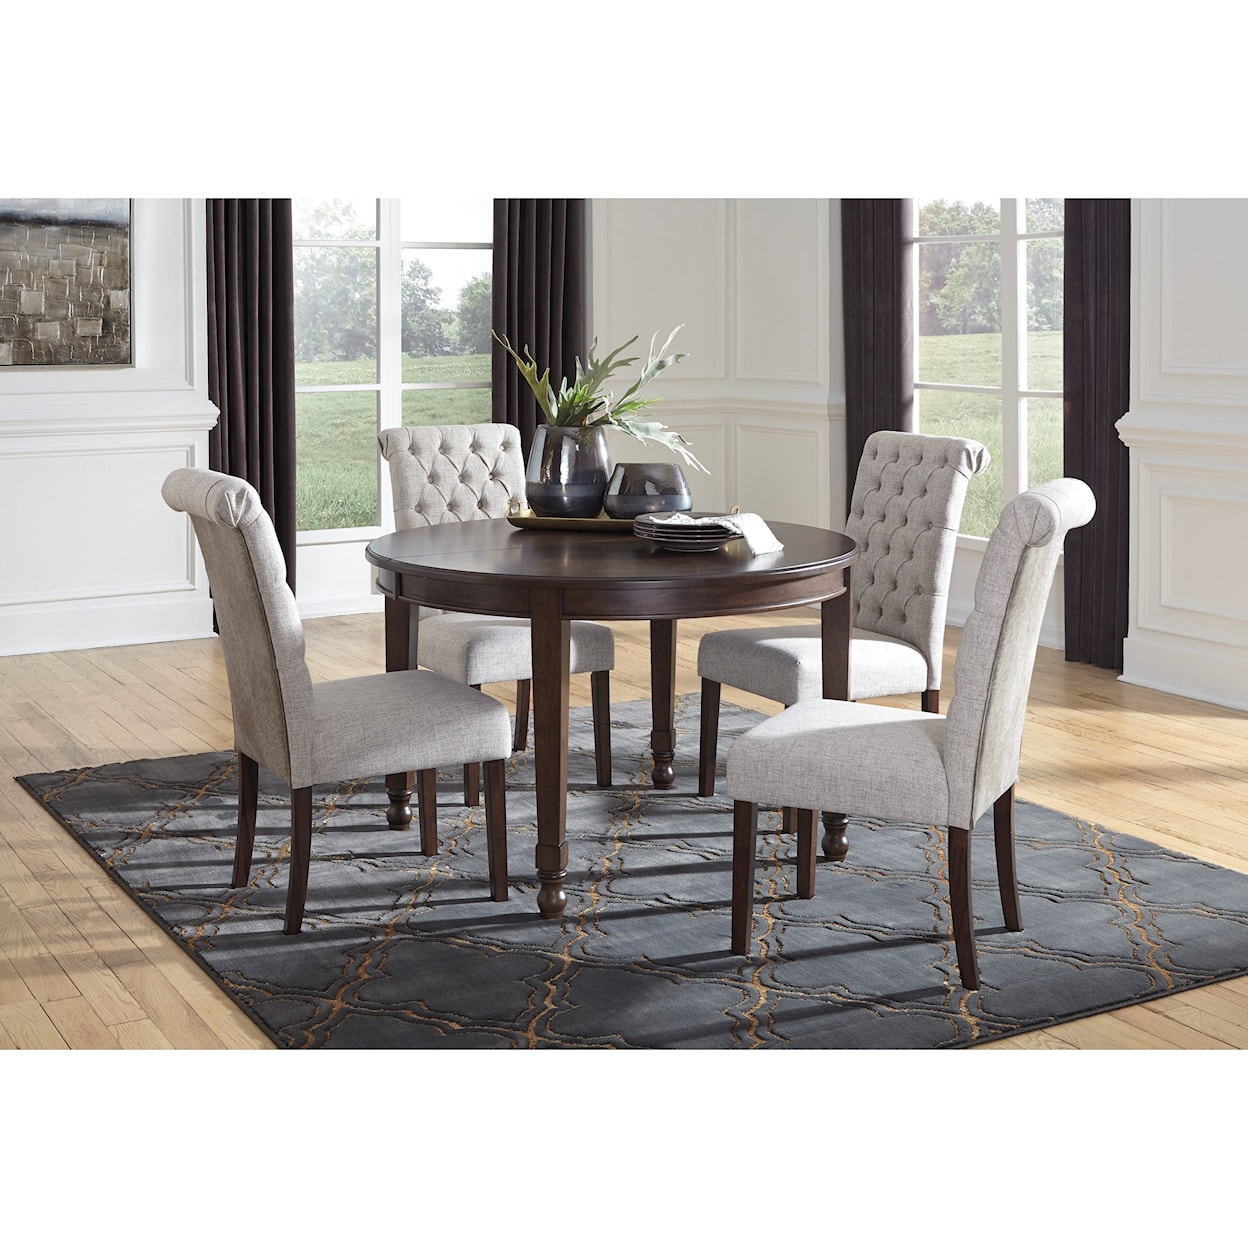 Benchcraft Adinton Oval Dining Room Extension Table